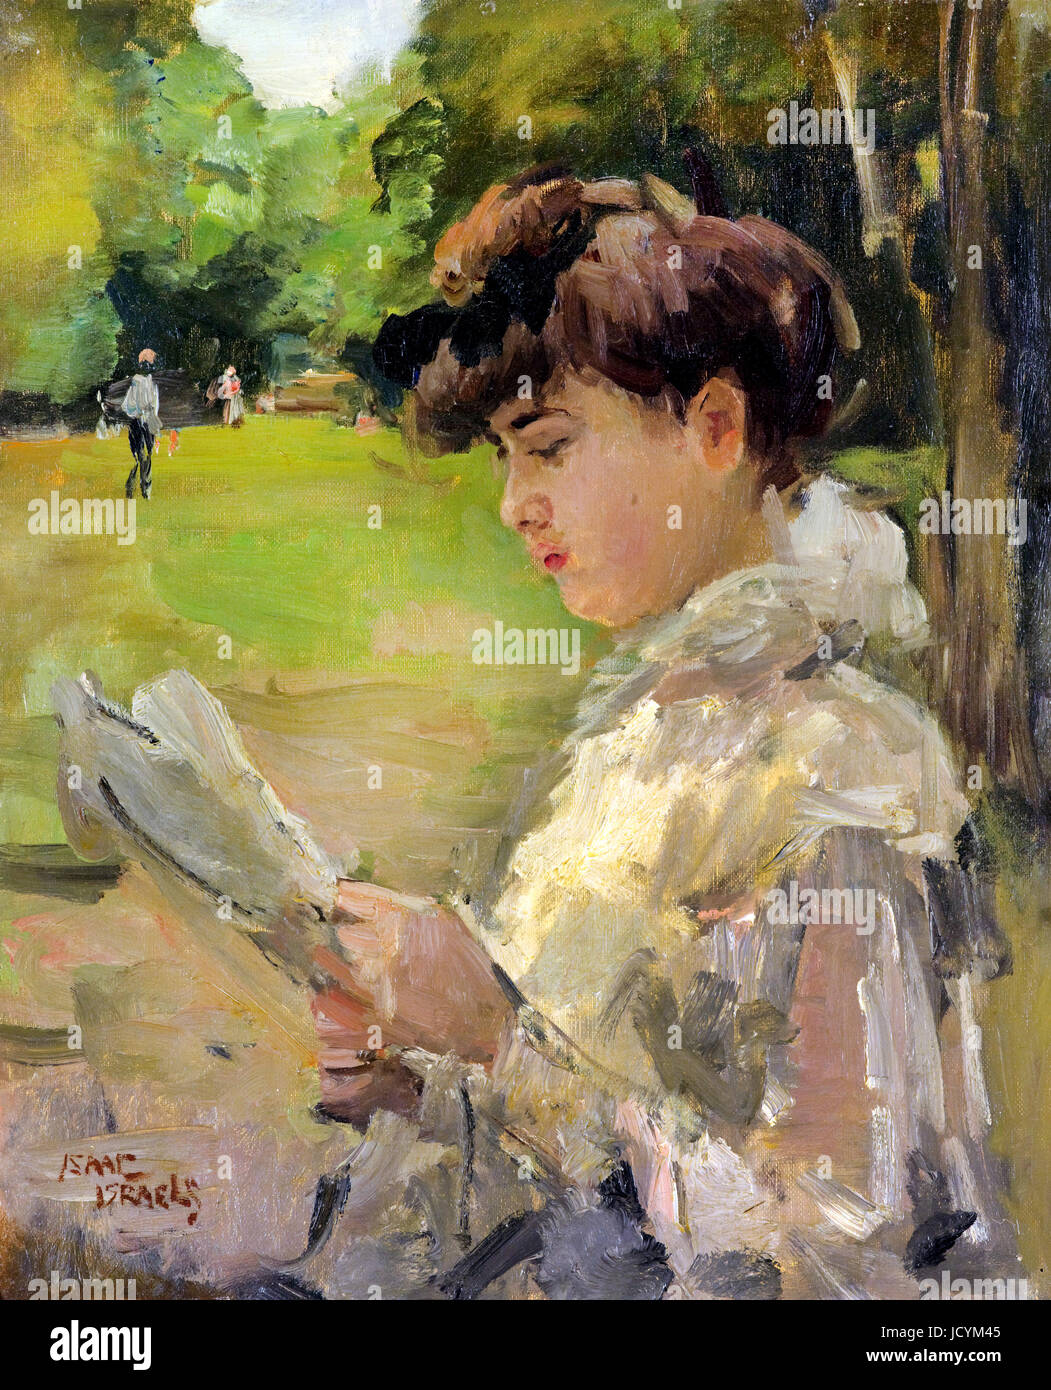 Isaac Israels, Girl Reading. Circa 1906. Oil on canvas. Gemeentemuseum Den Haag, The Hague, Netherlands. Stock Photo